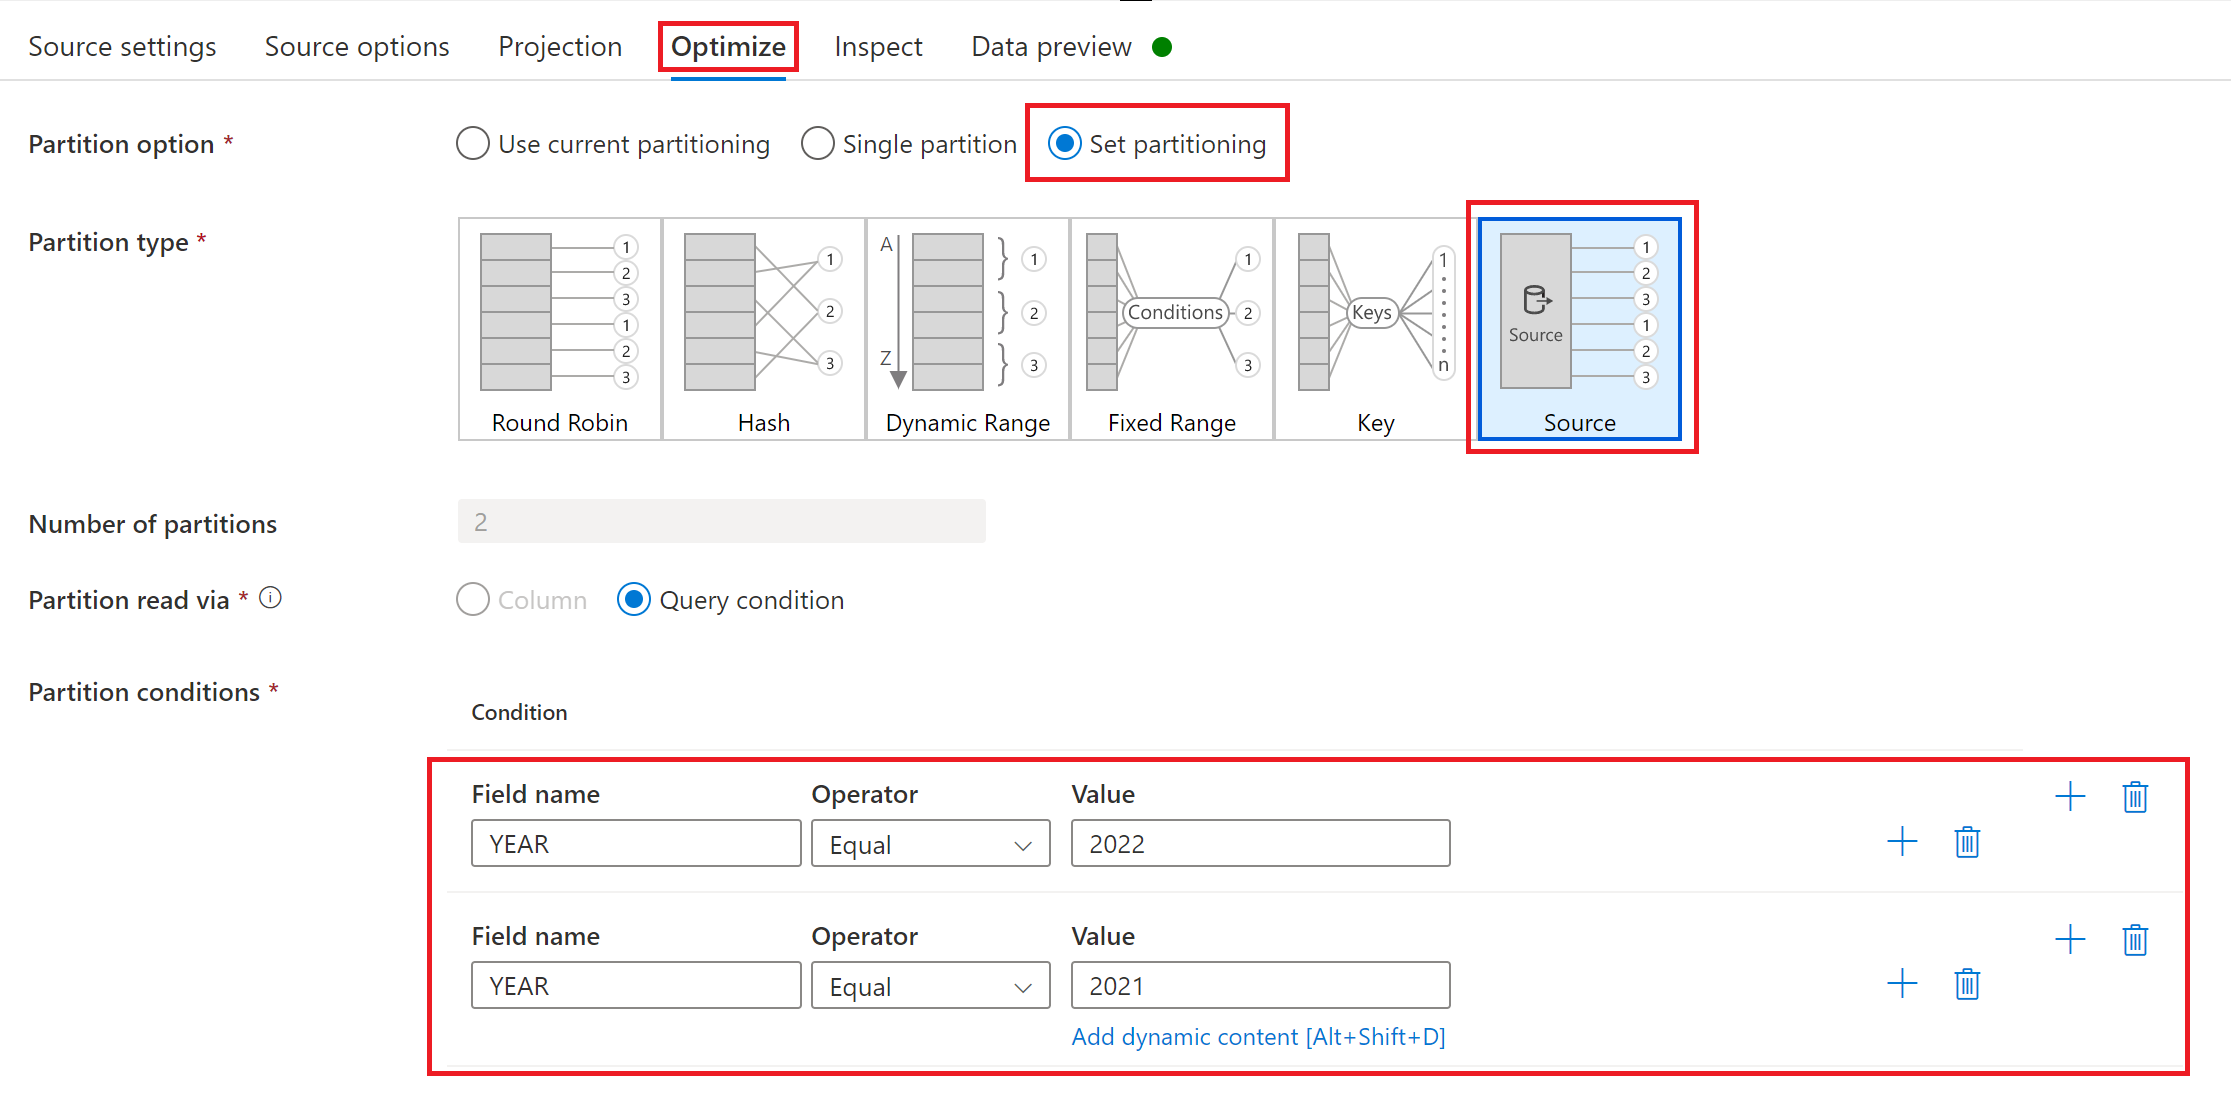 Screenshot of the partitioning options in optimize of mapping data flow source.